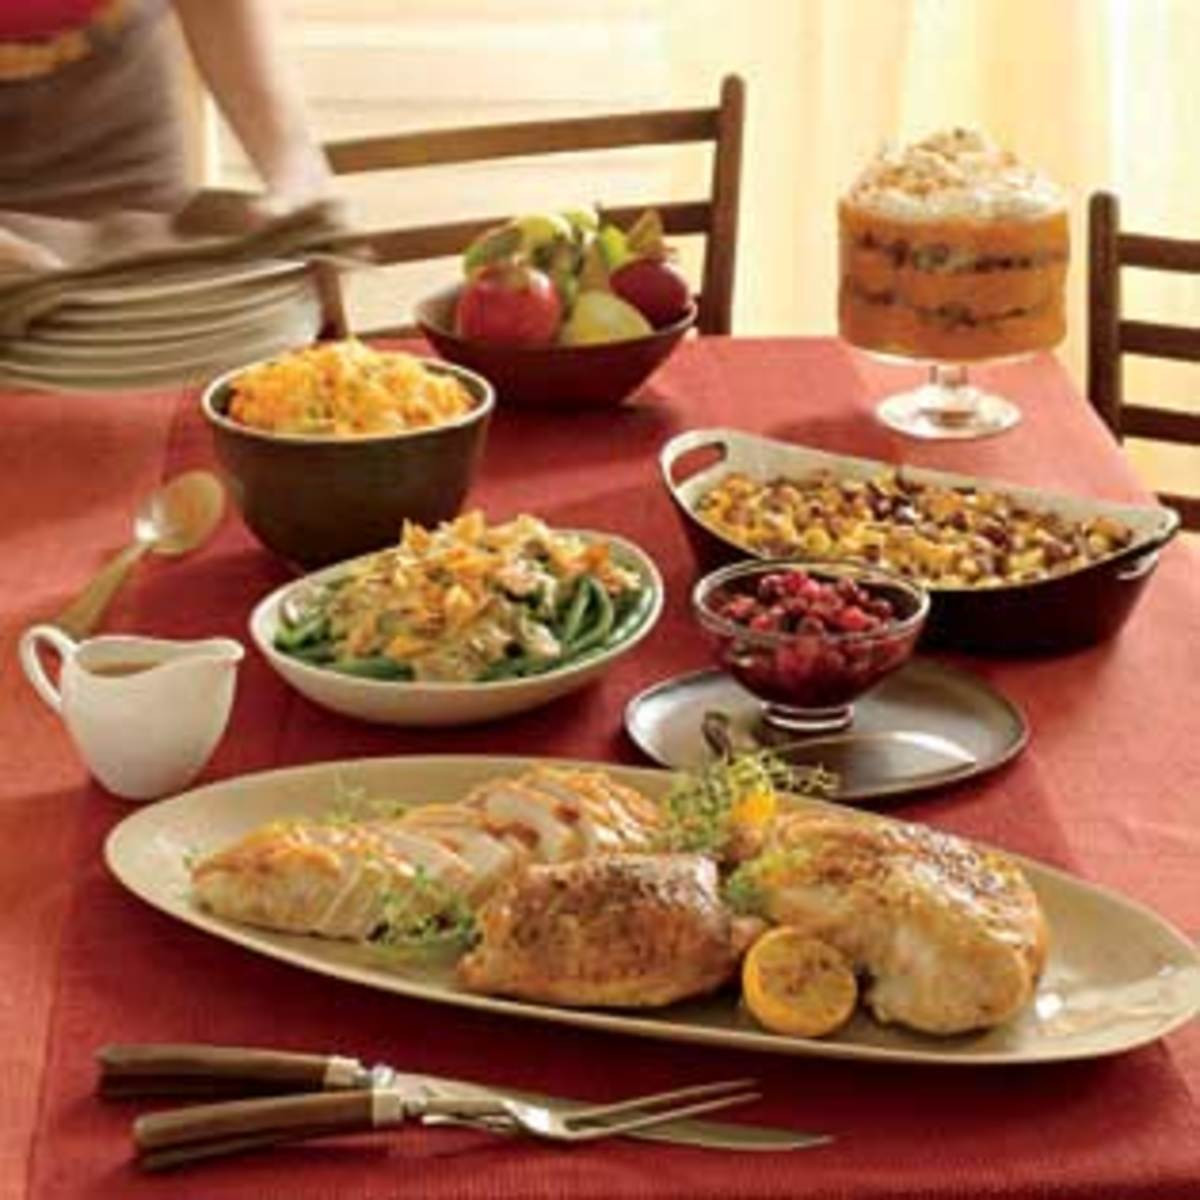 Rachael Ray Easter Dinner Menu
 60 Minute Thanksgiving Rachael Ray Every Day